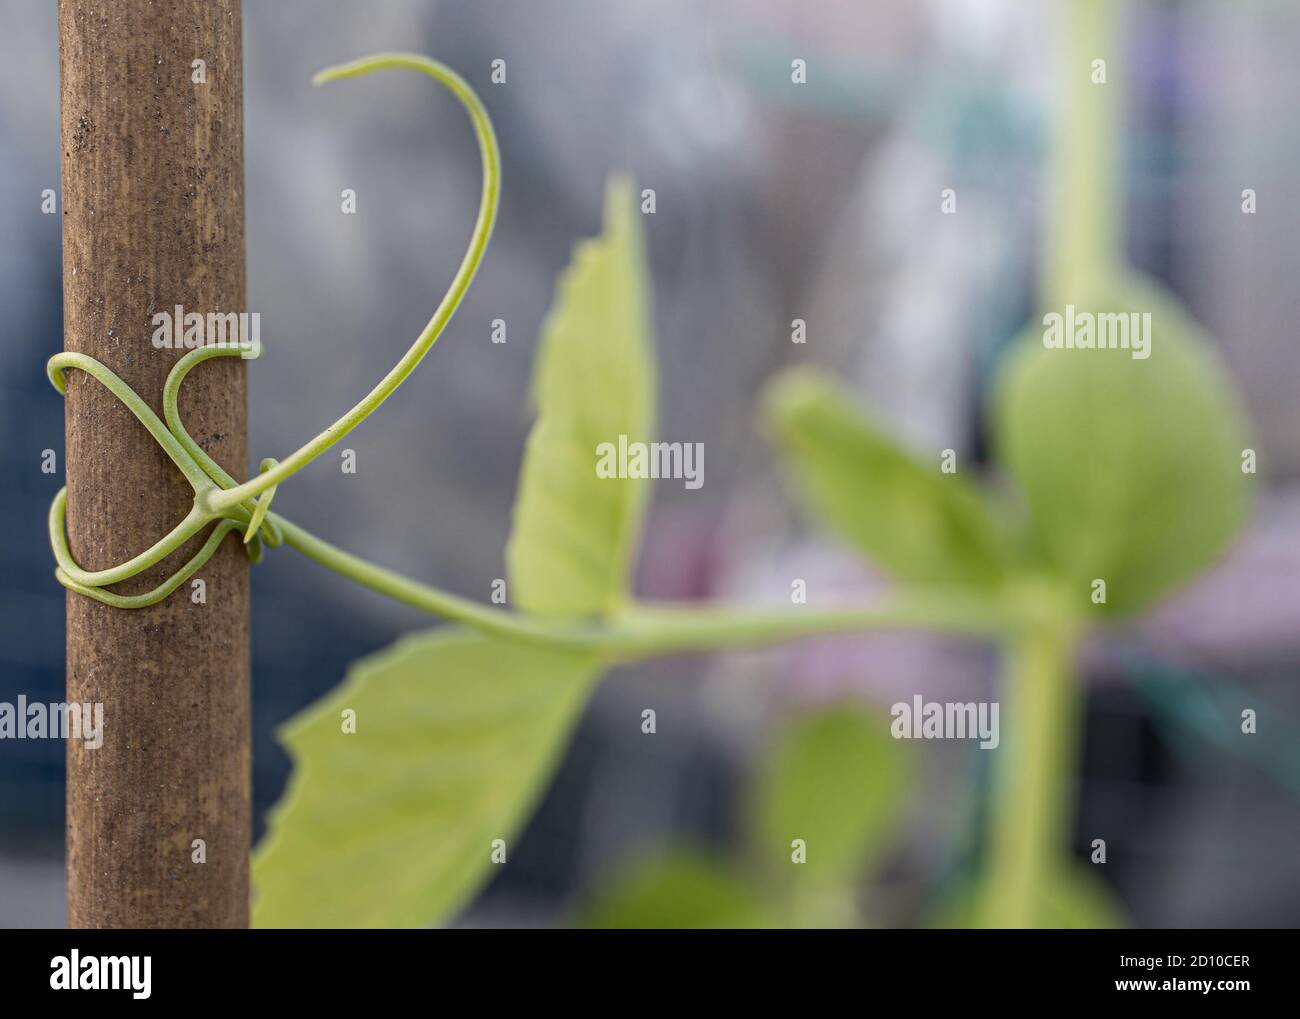 Climbing pea vine wrapped around a bamboo pole. Close up of Sugar Pea plant stared from seed. Bamboo trellis and soft green trellis mesh to climb. Stock Photo